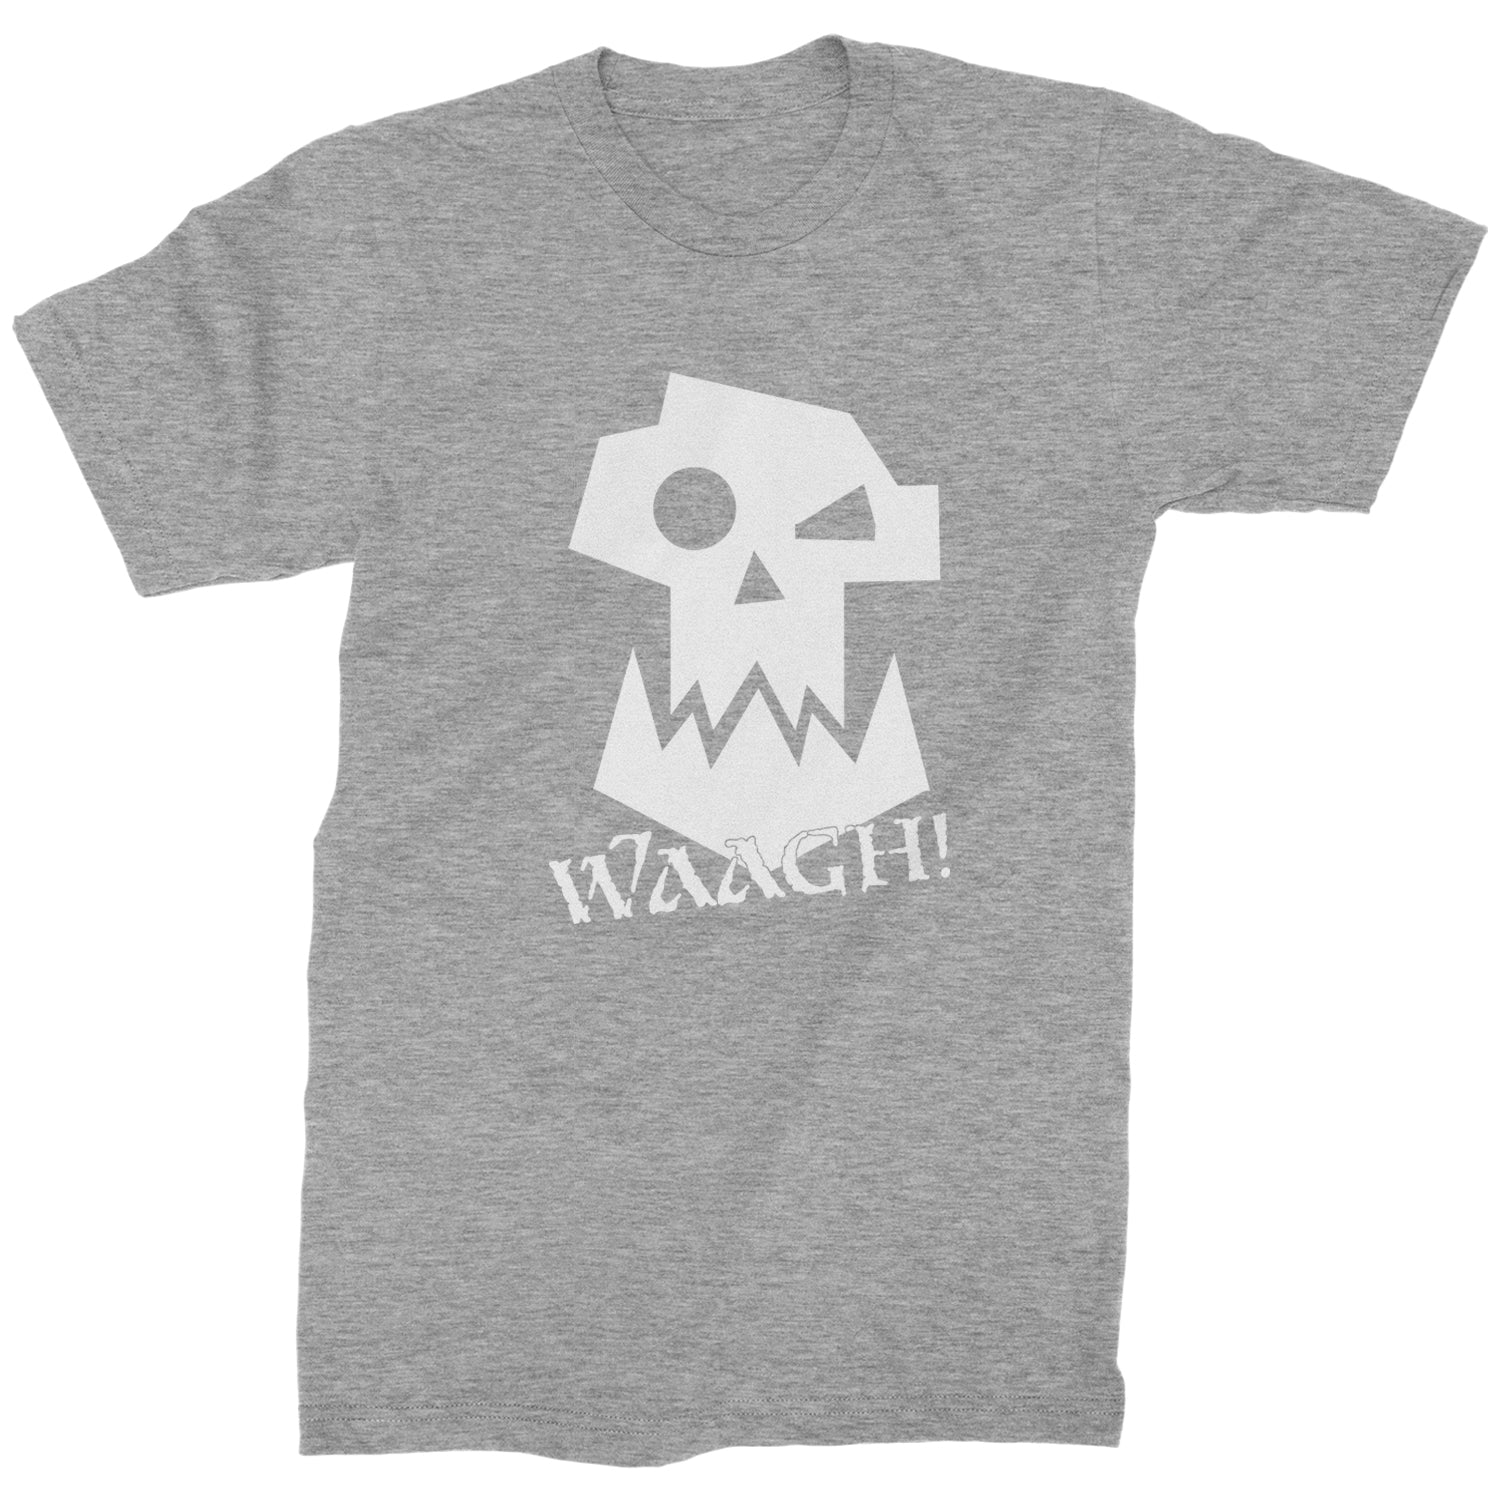 Ork Miniature Tabletop Wargaming Waagh Mens T-shirt #expressiontees by Expression Tees